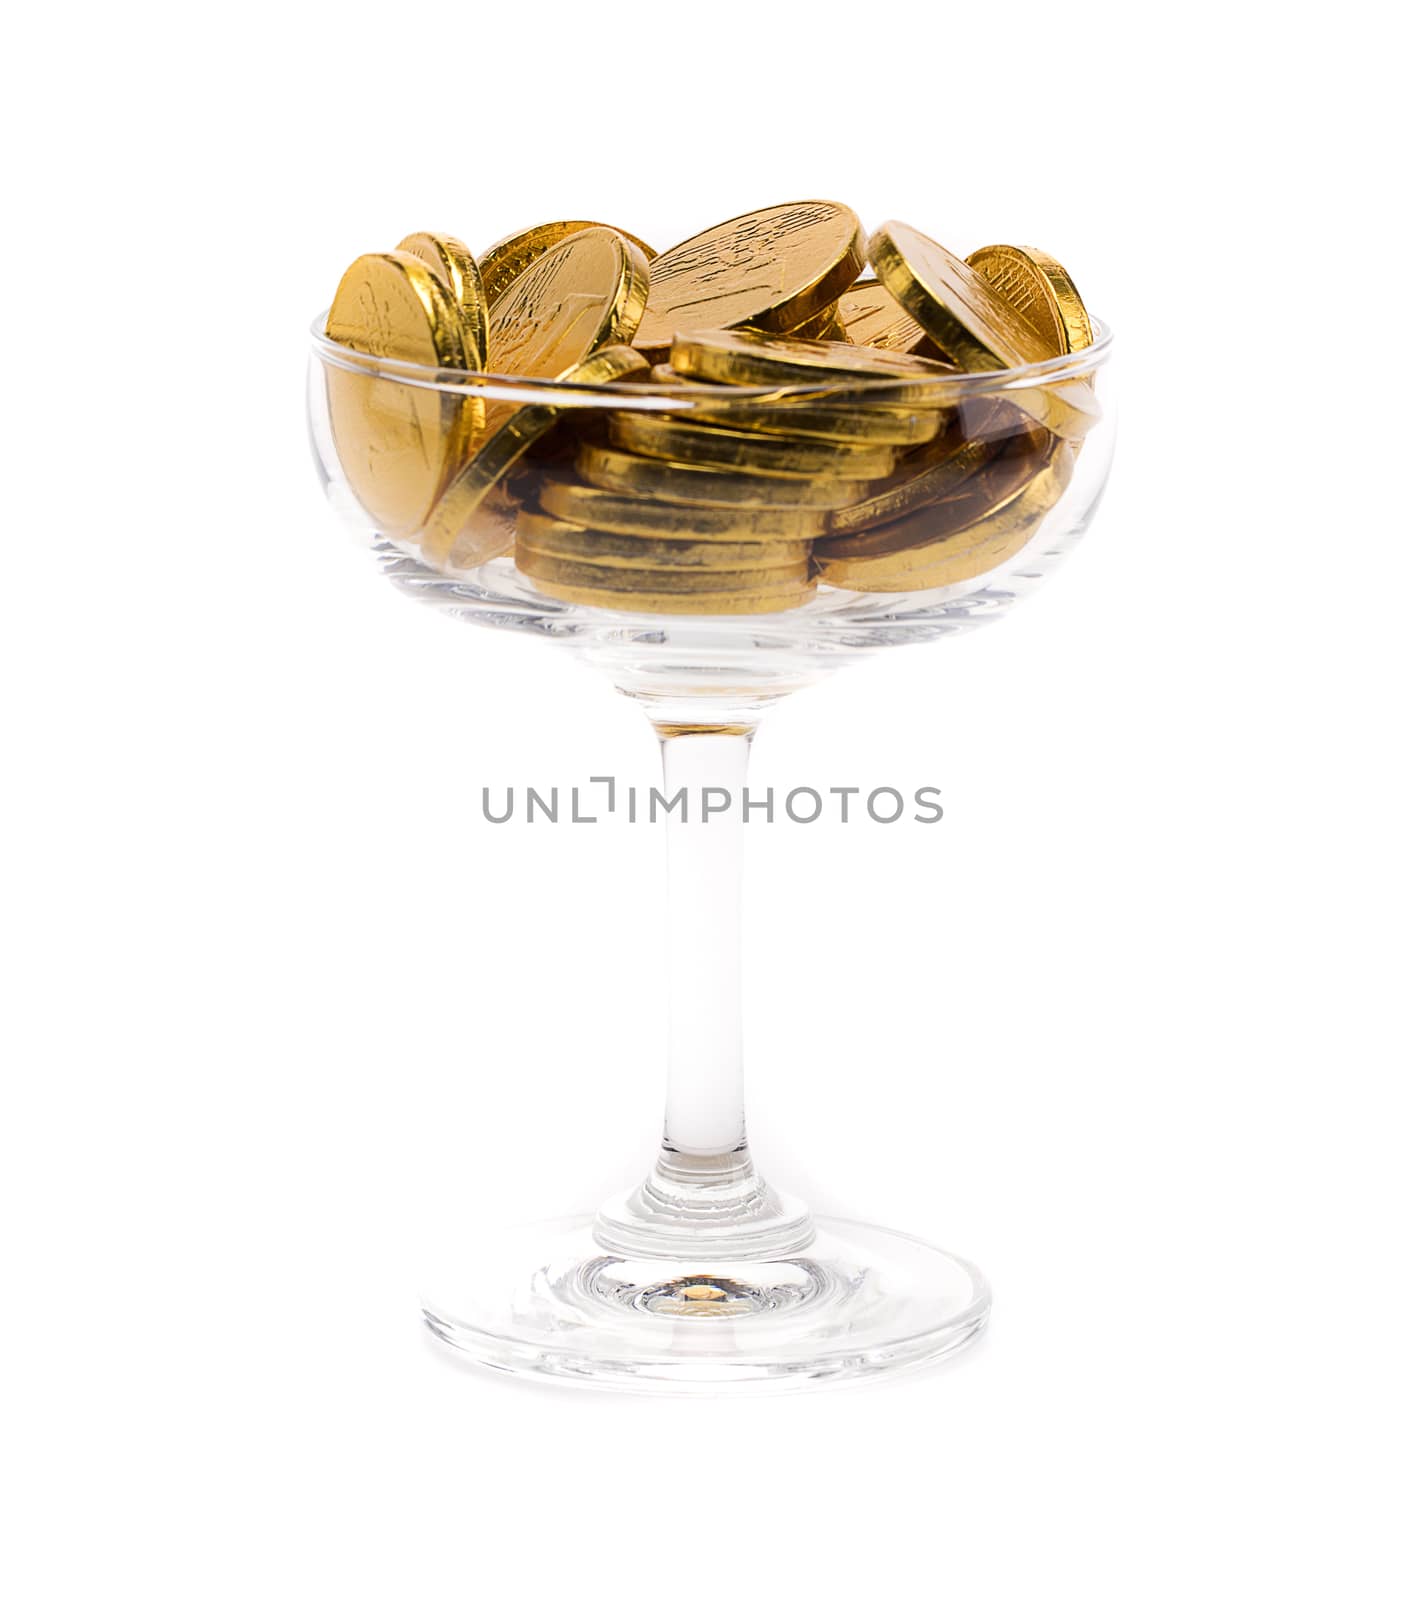 gold coins in a glass by Nawoot